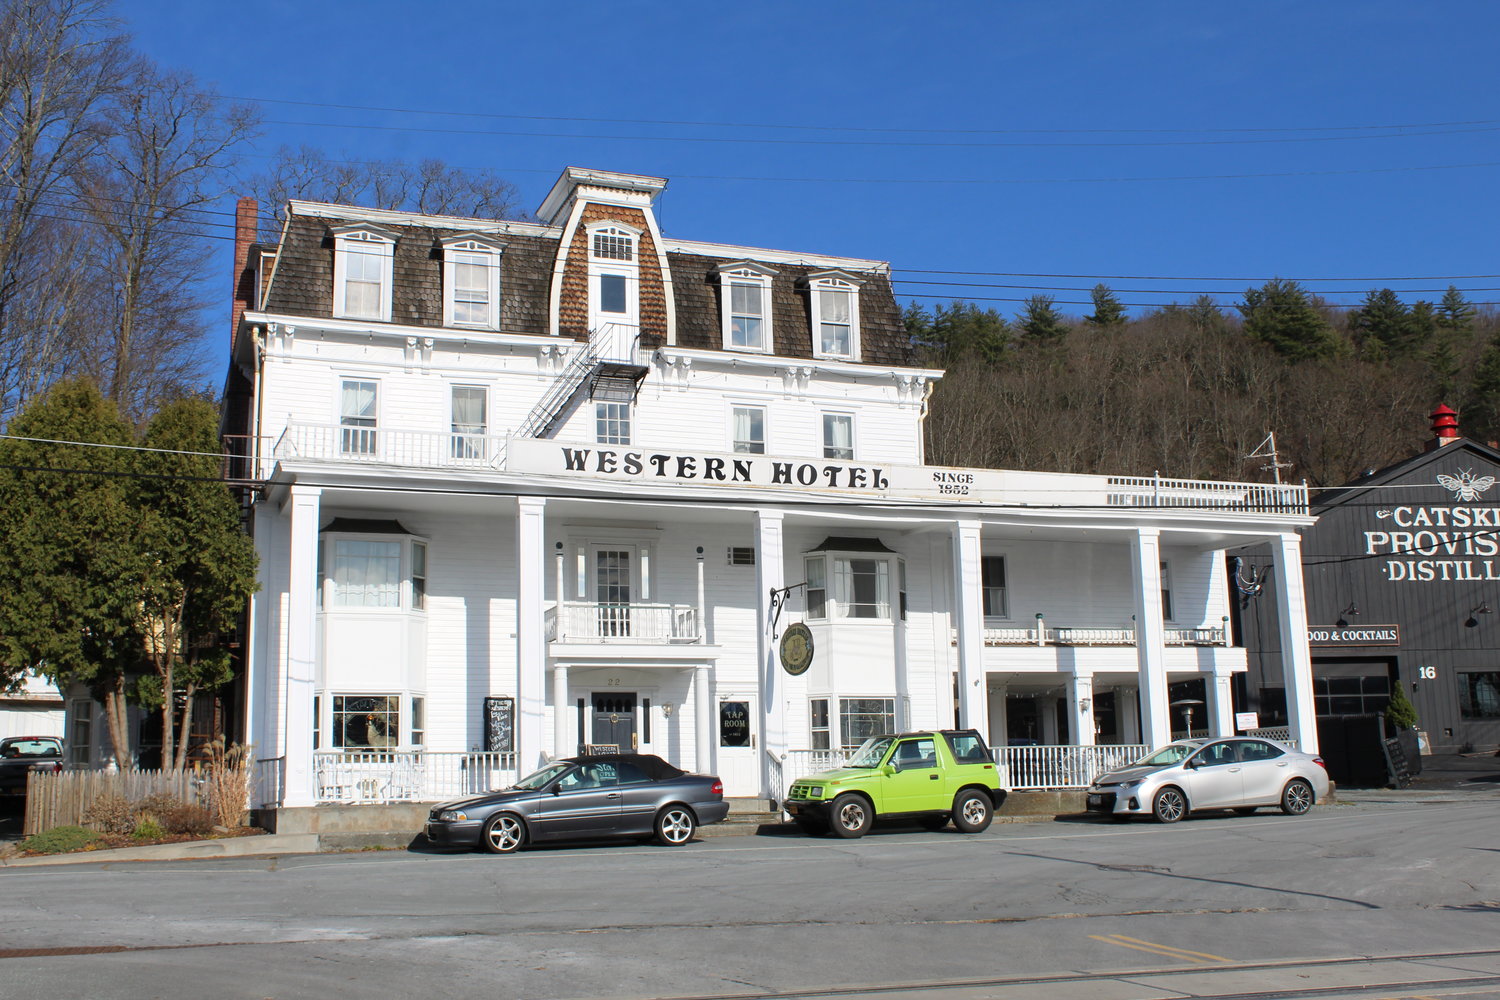 The Western Hotel has been a central point in town since 1852.